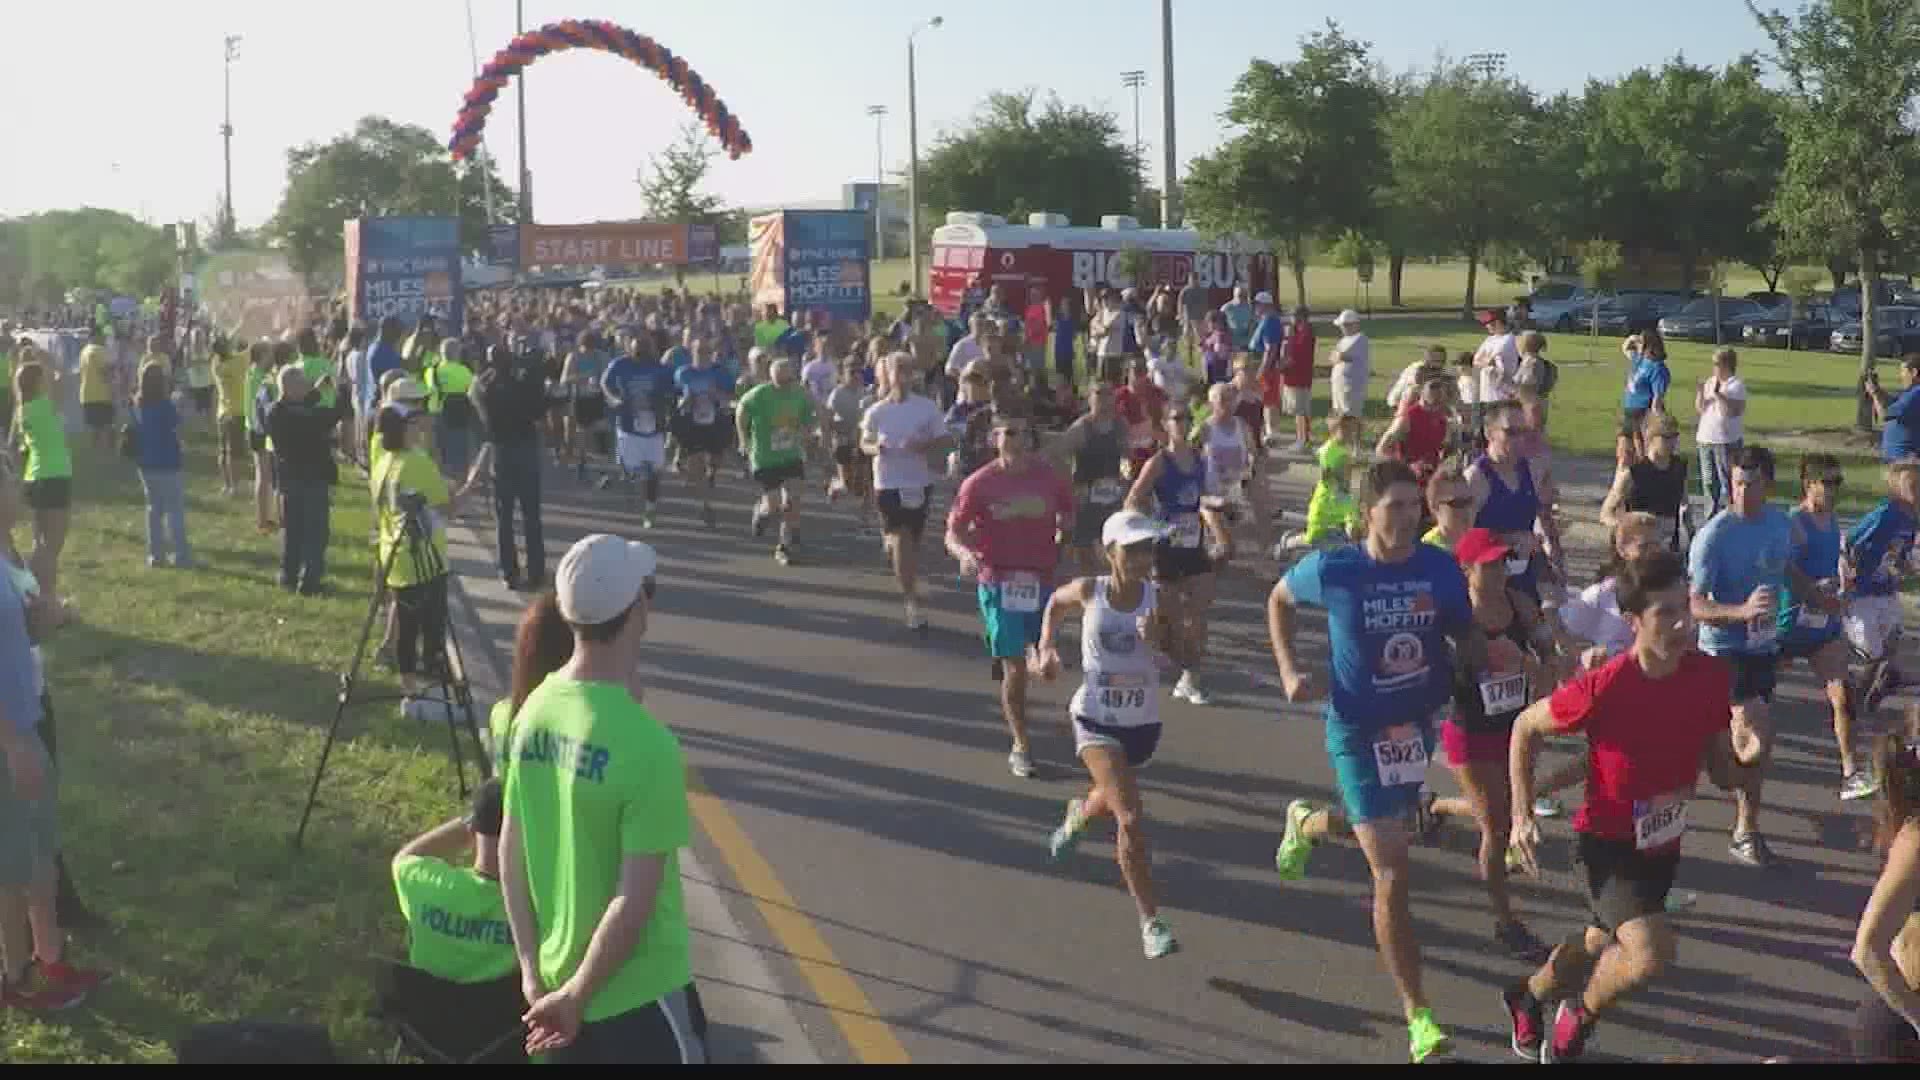 100 percent of the proceeds from the annual race goes toward cancer research at Moffitt Cancer Center.